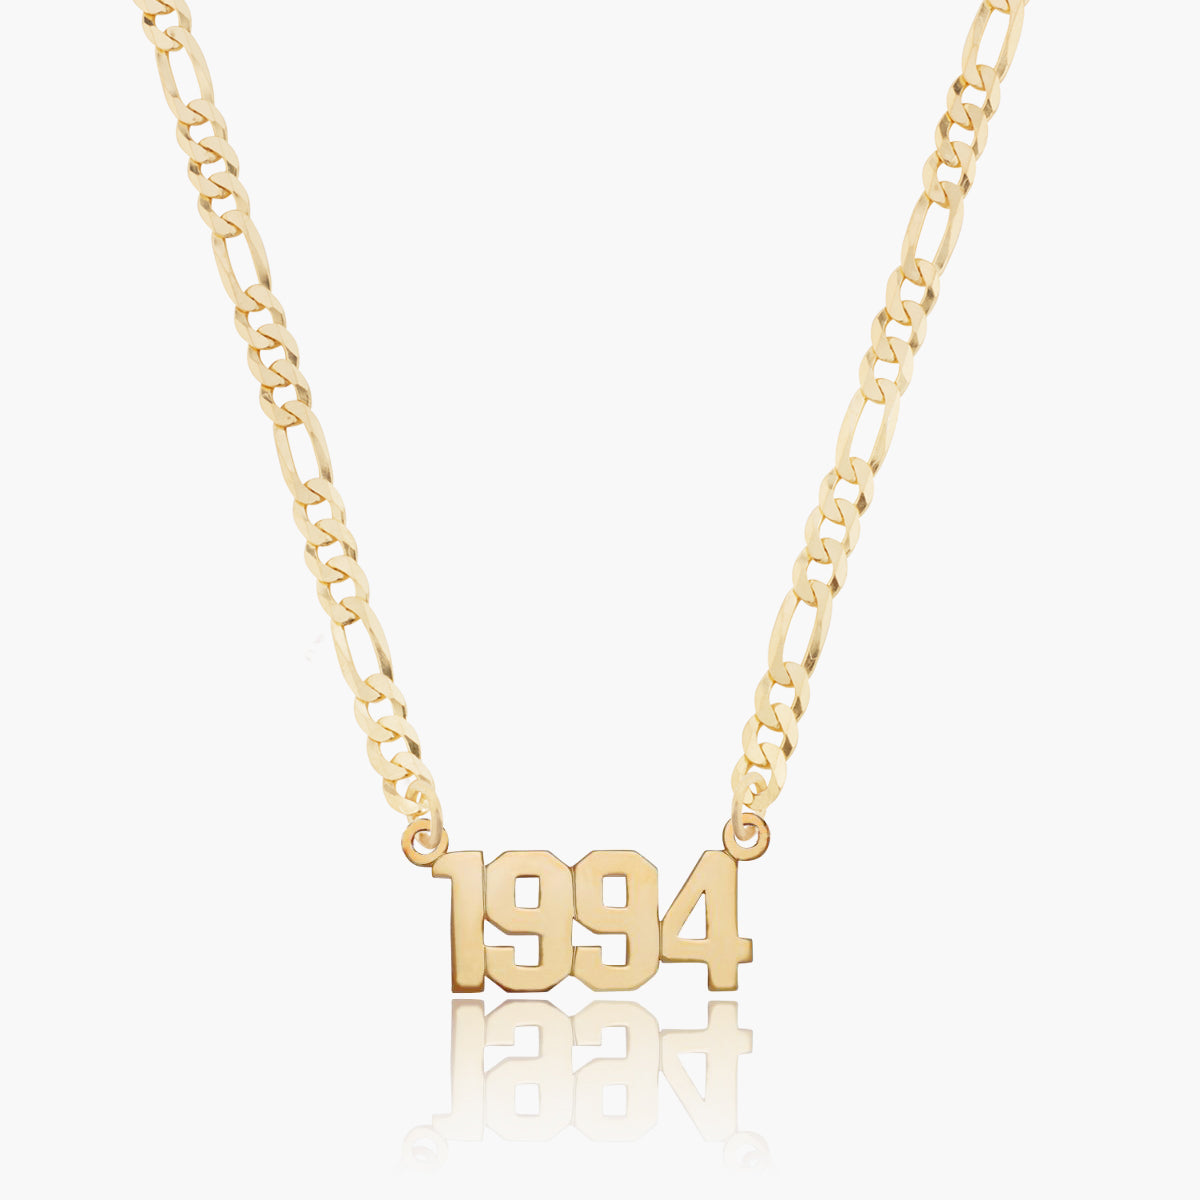 The Year Necklace